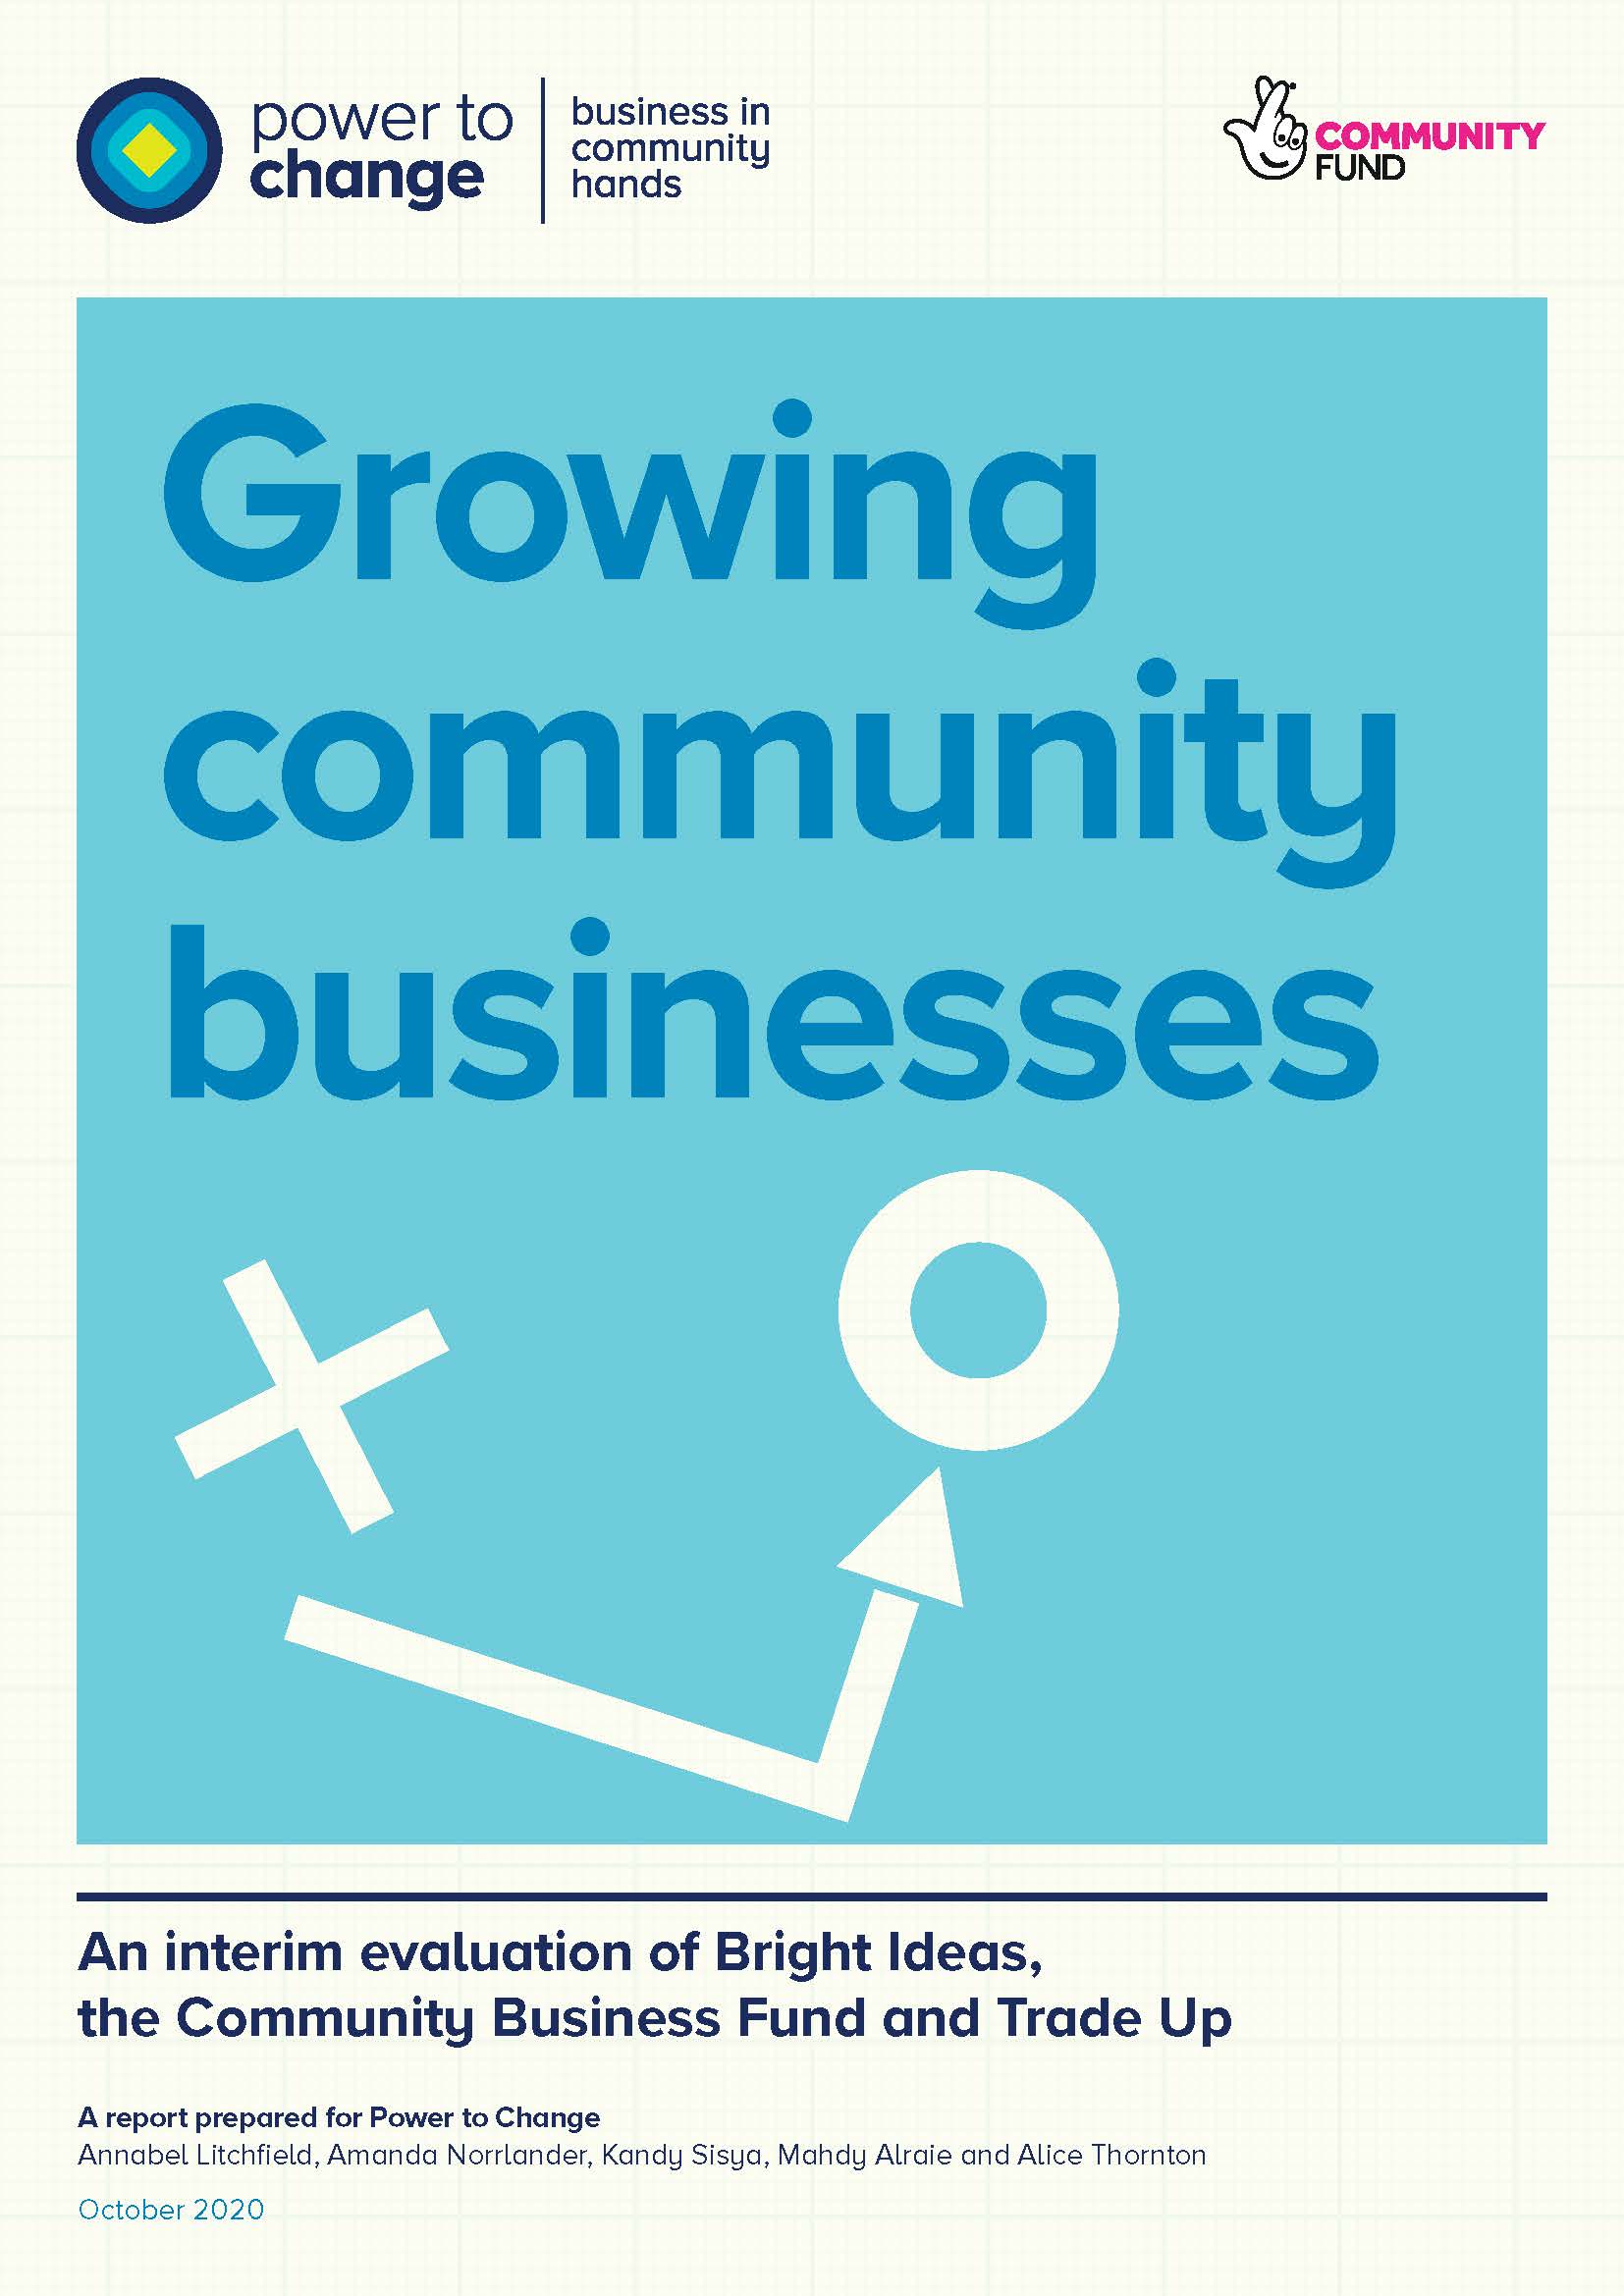 Growing community businesses: An interim evaluation of Bright Ideas, the Community Business Fund and Trade Up